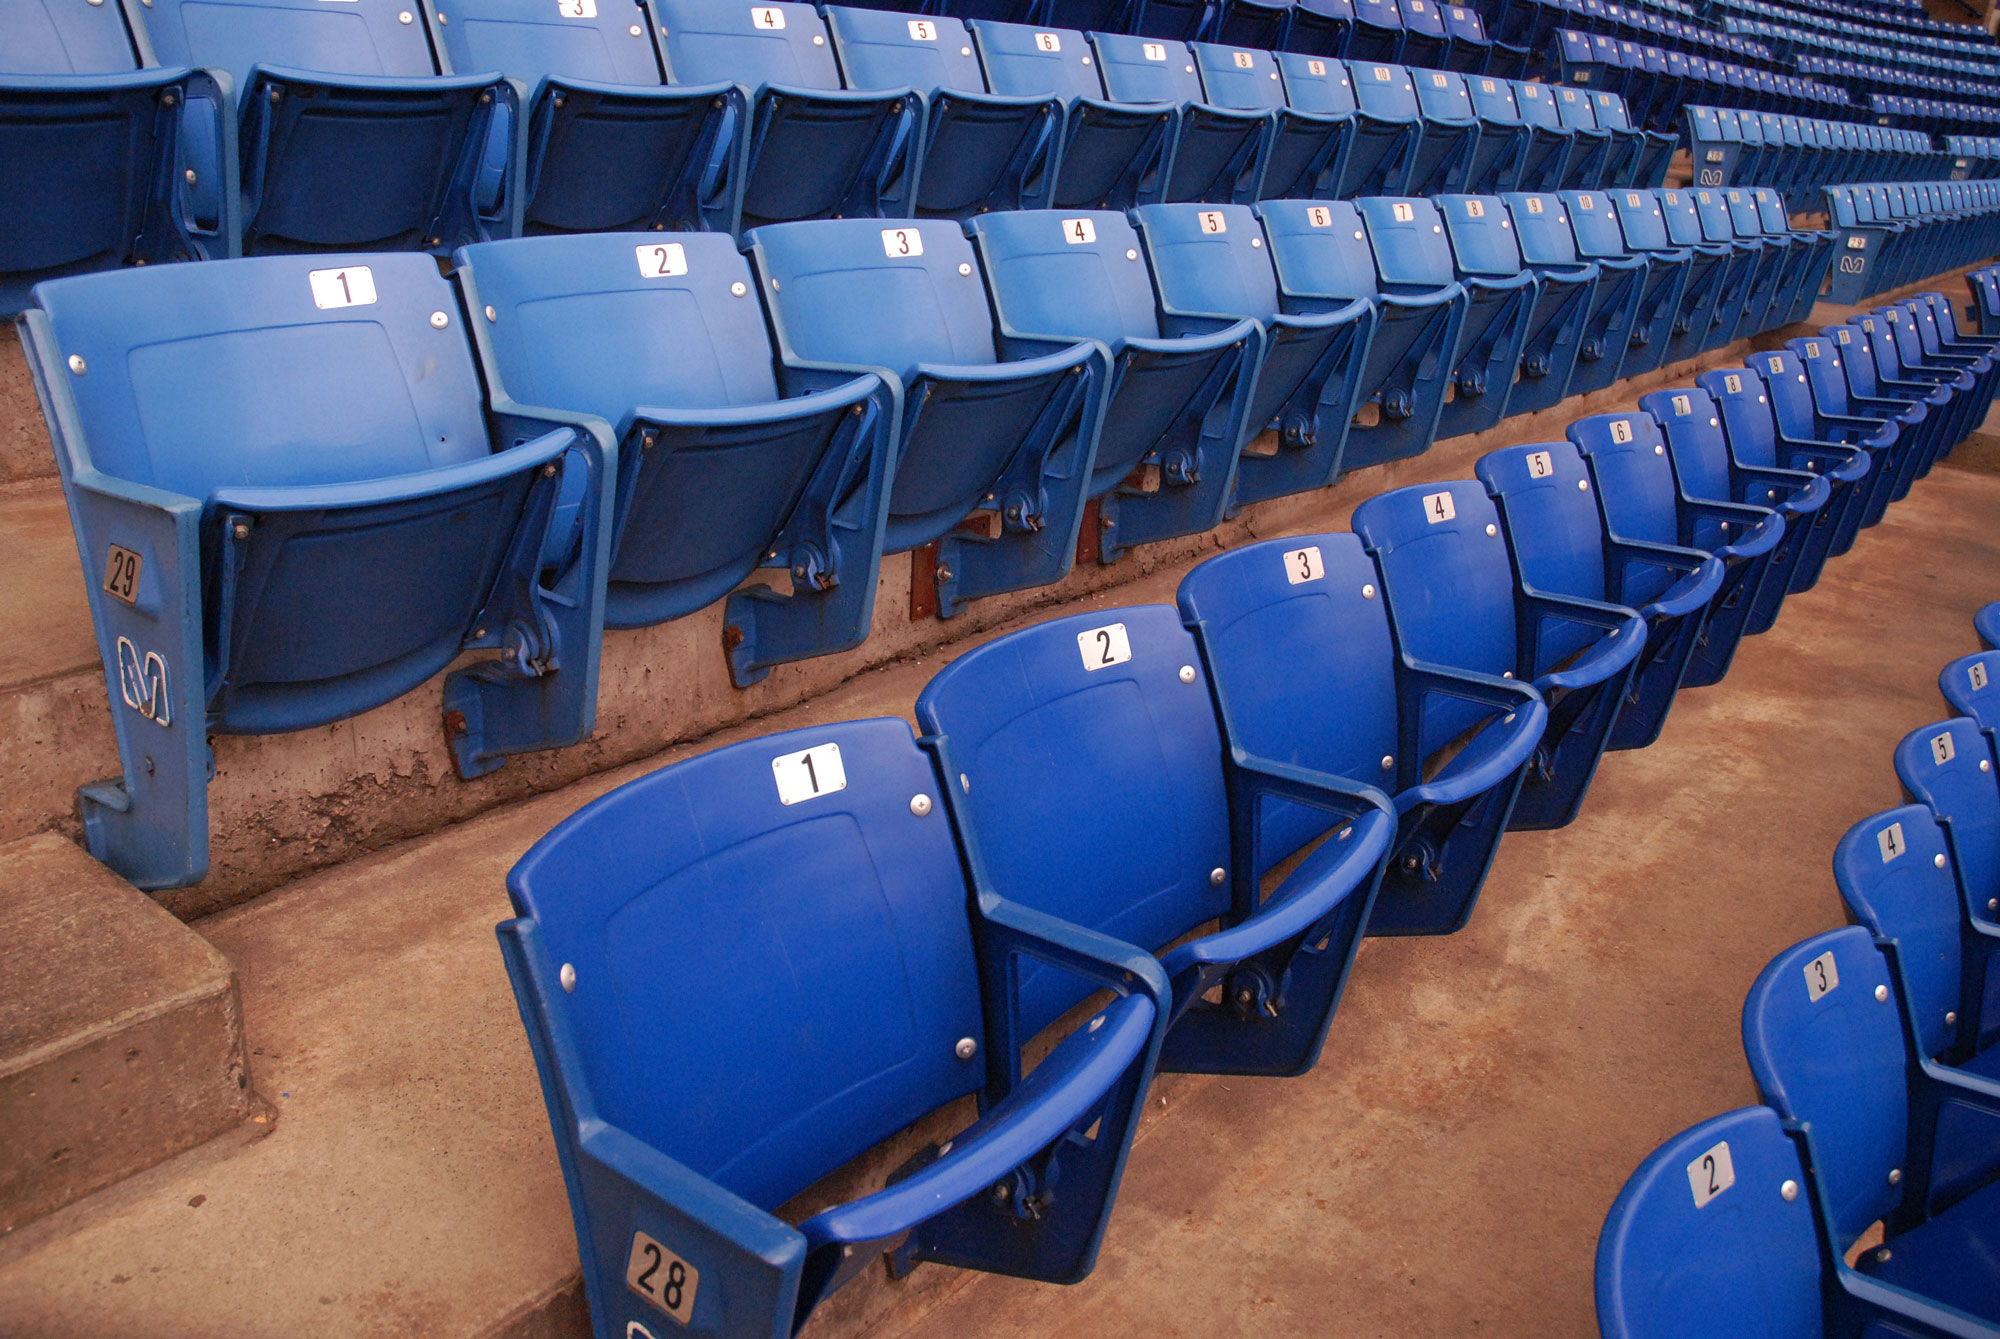 Metrodome now taking bids on seat removal ahead of demolition ...